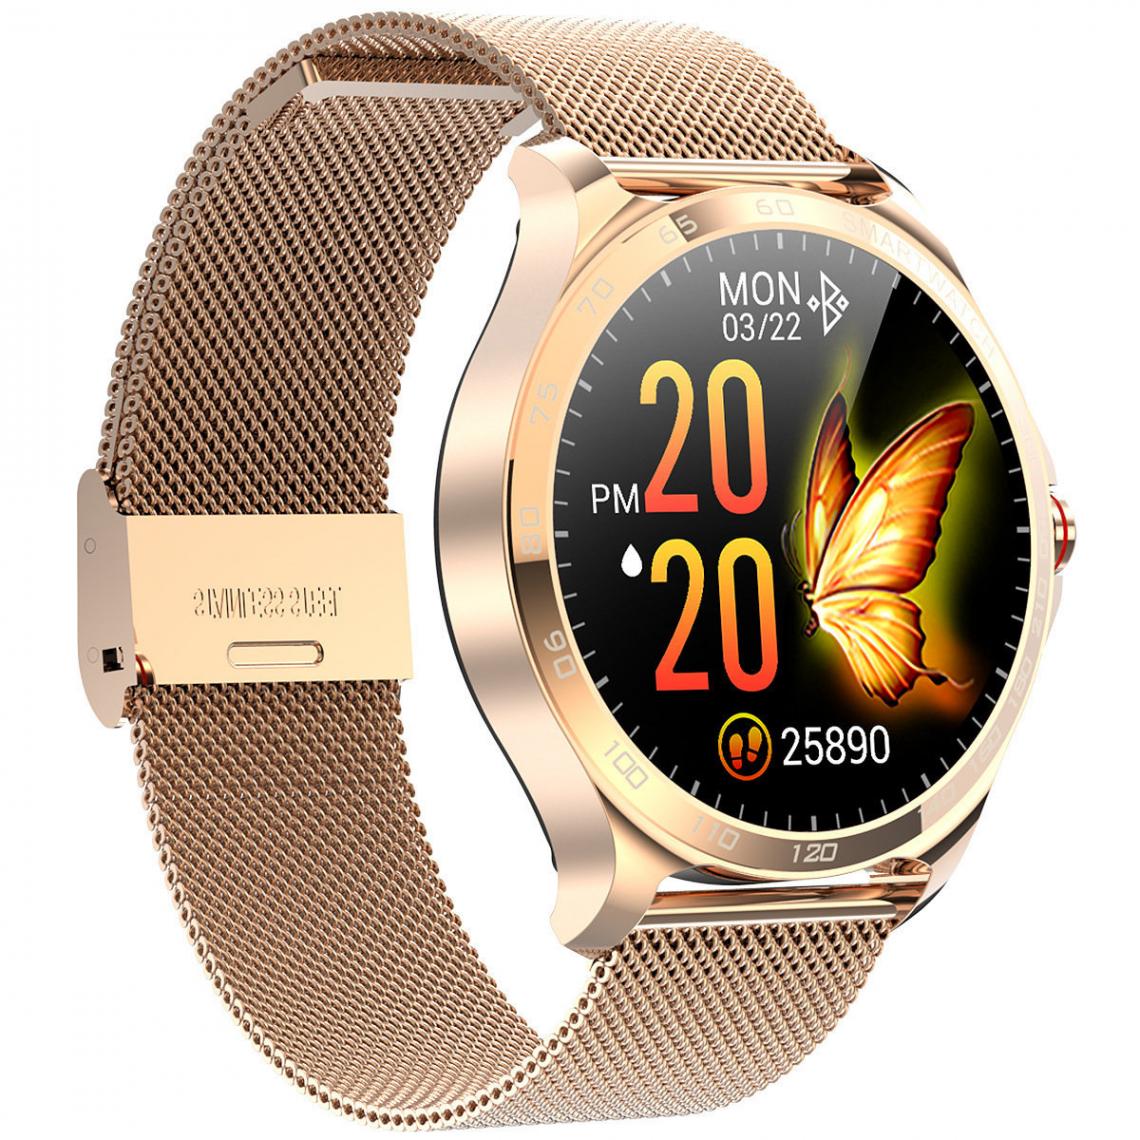 Chronotech Montres - Smart Watches Fitness Trackers Women Men Waterproof Bluetooth Heart Rate Blood Pressure Health Monitor Calories Step Counter Activity Tracker Ladies Sports Outdoor Smartwatch Android iOS(gold) - Montre connectée